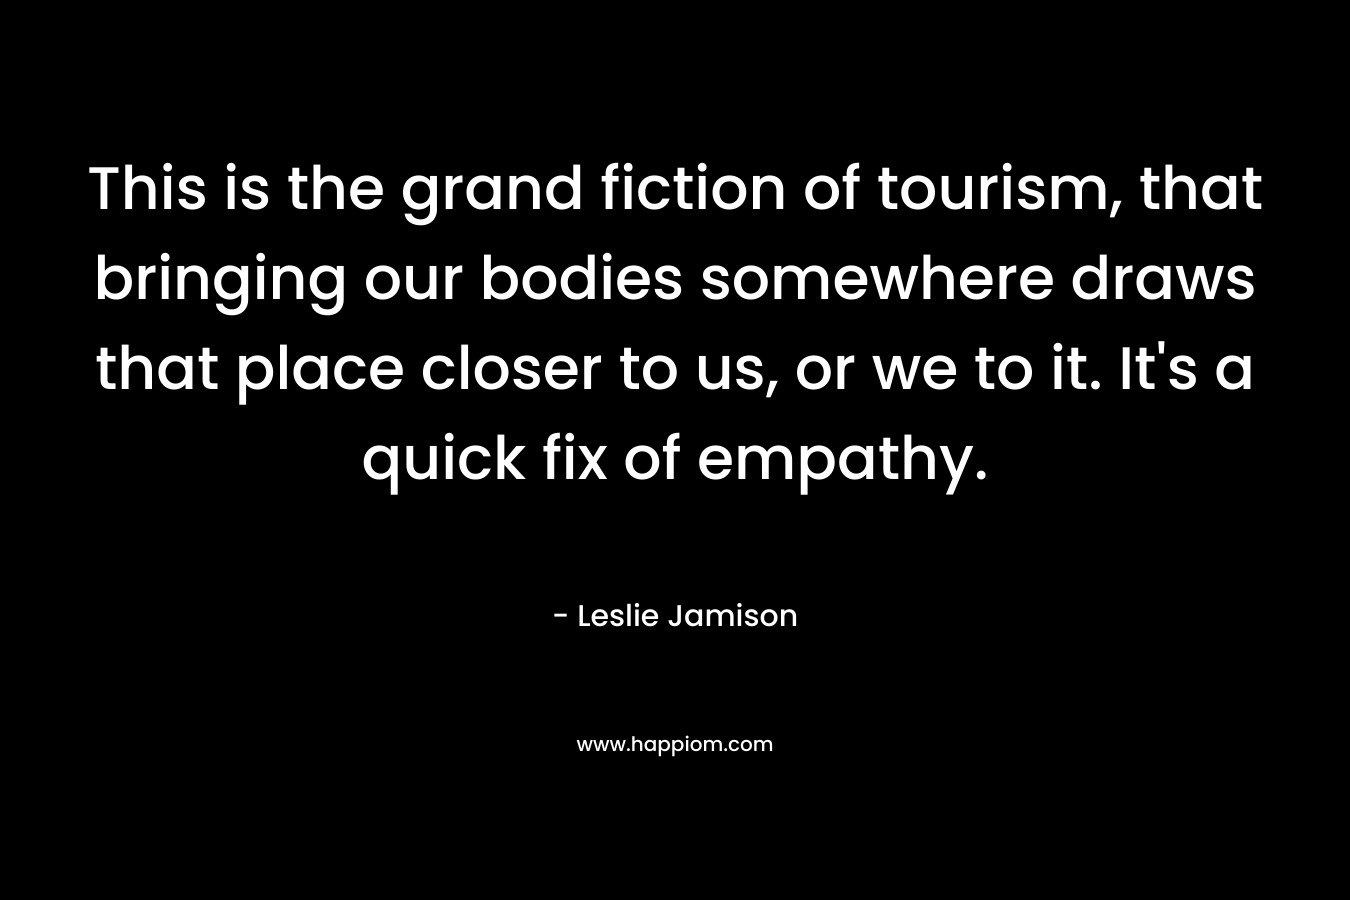 This is the grand fiction of tourism, that bringing our bodies somewhere draws that place closer to us, or we to it. It’s a quick fix of empathy. – Leslie Jamison